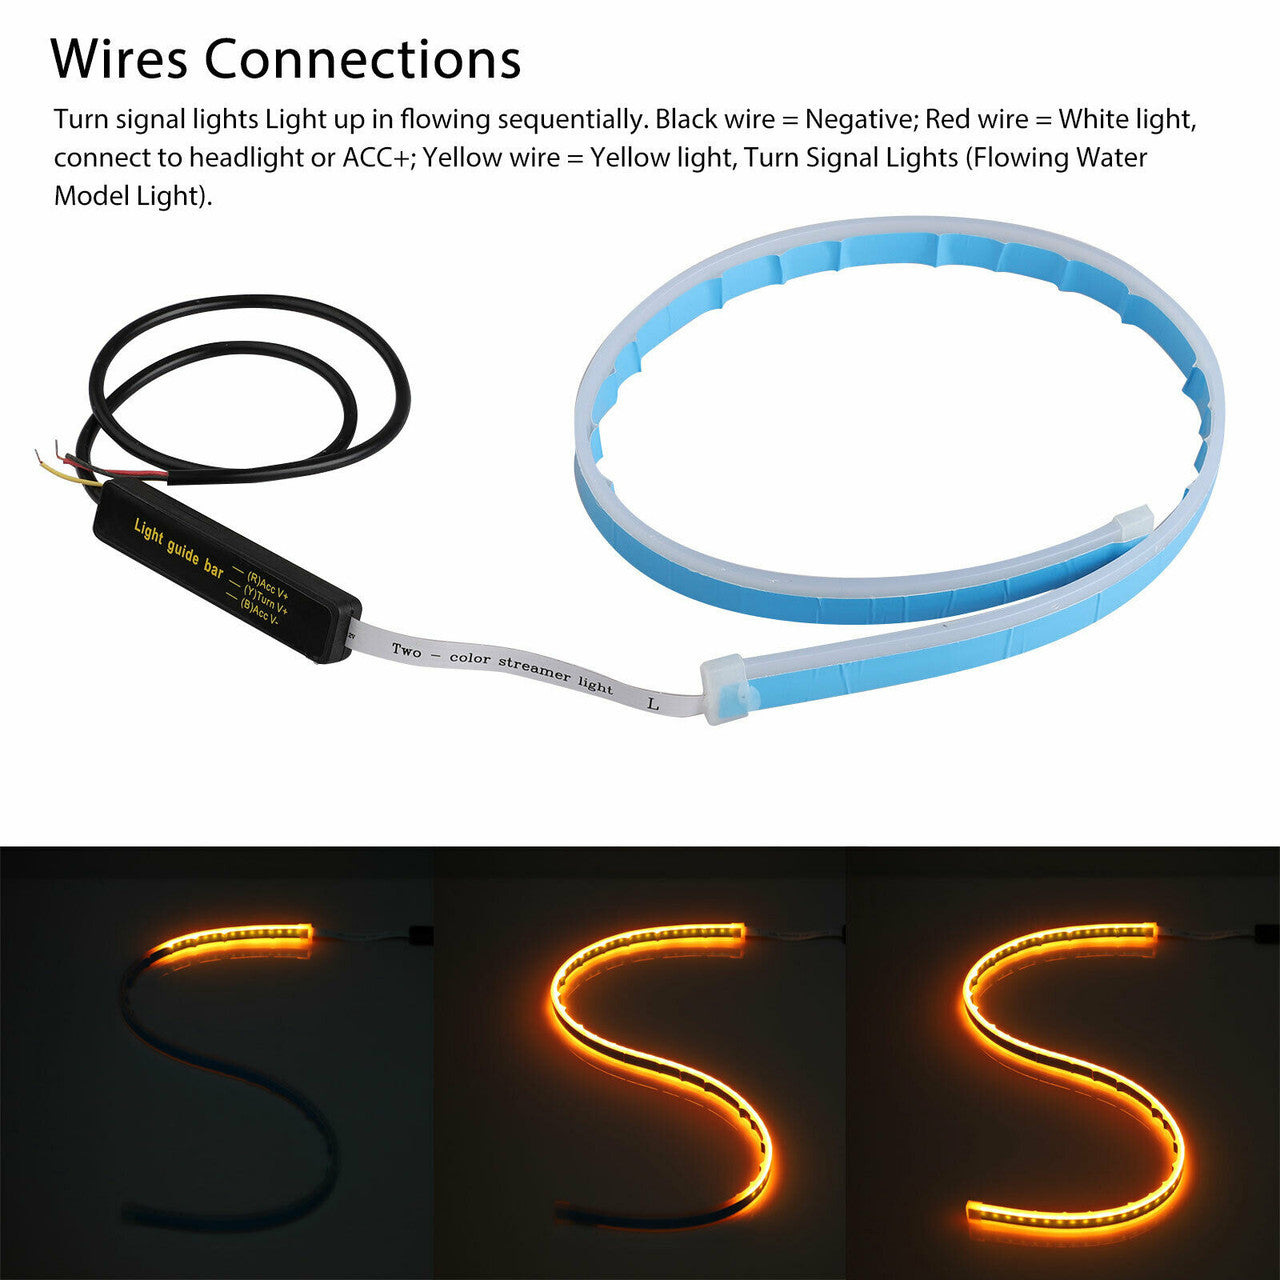 Flexible Led Light Strip 2Pcs 24 Inches Dual Color White-Amber Sequential Switchback DRL LED Kit Waterproof for Car Replacement Switchback Headlight Decorative Lamp Kits and Turn Signal Tube Lights